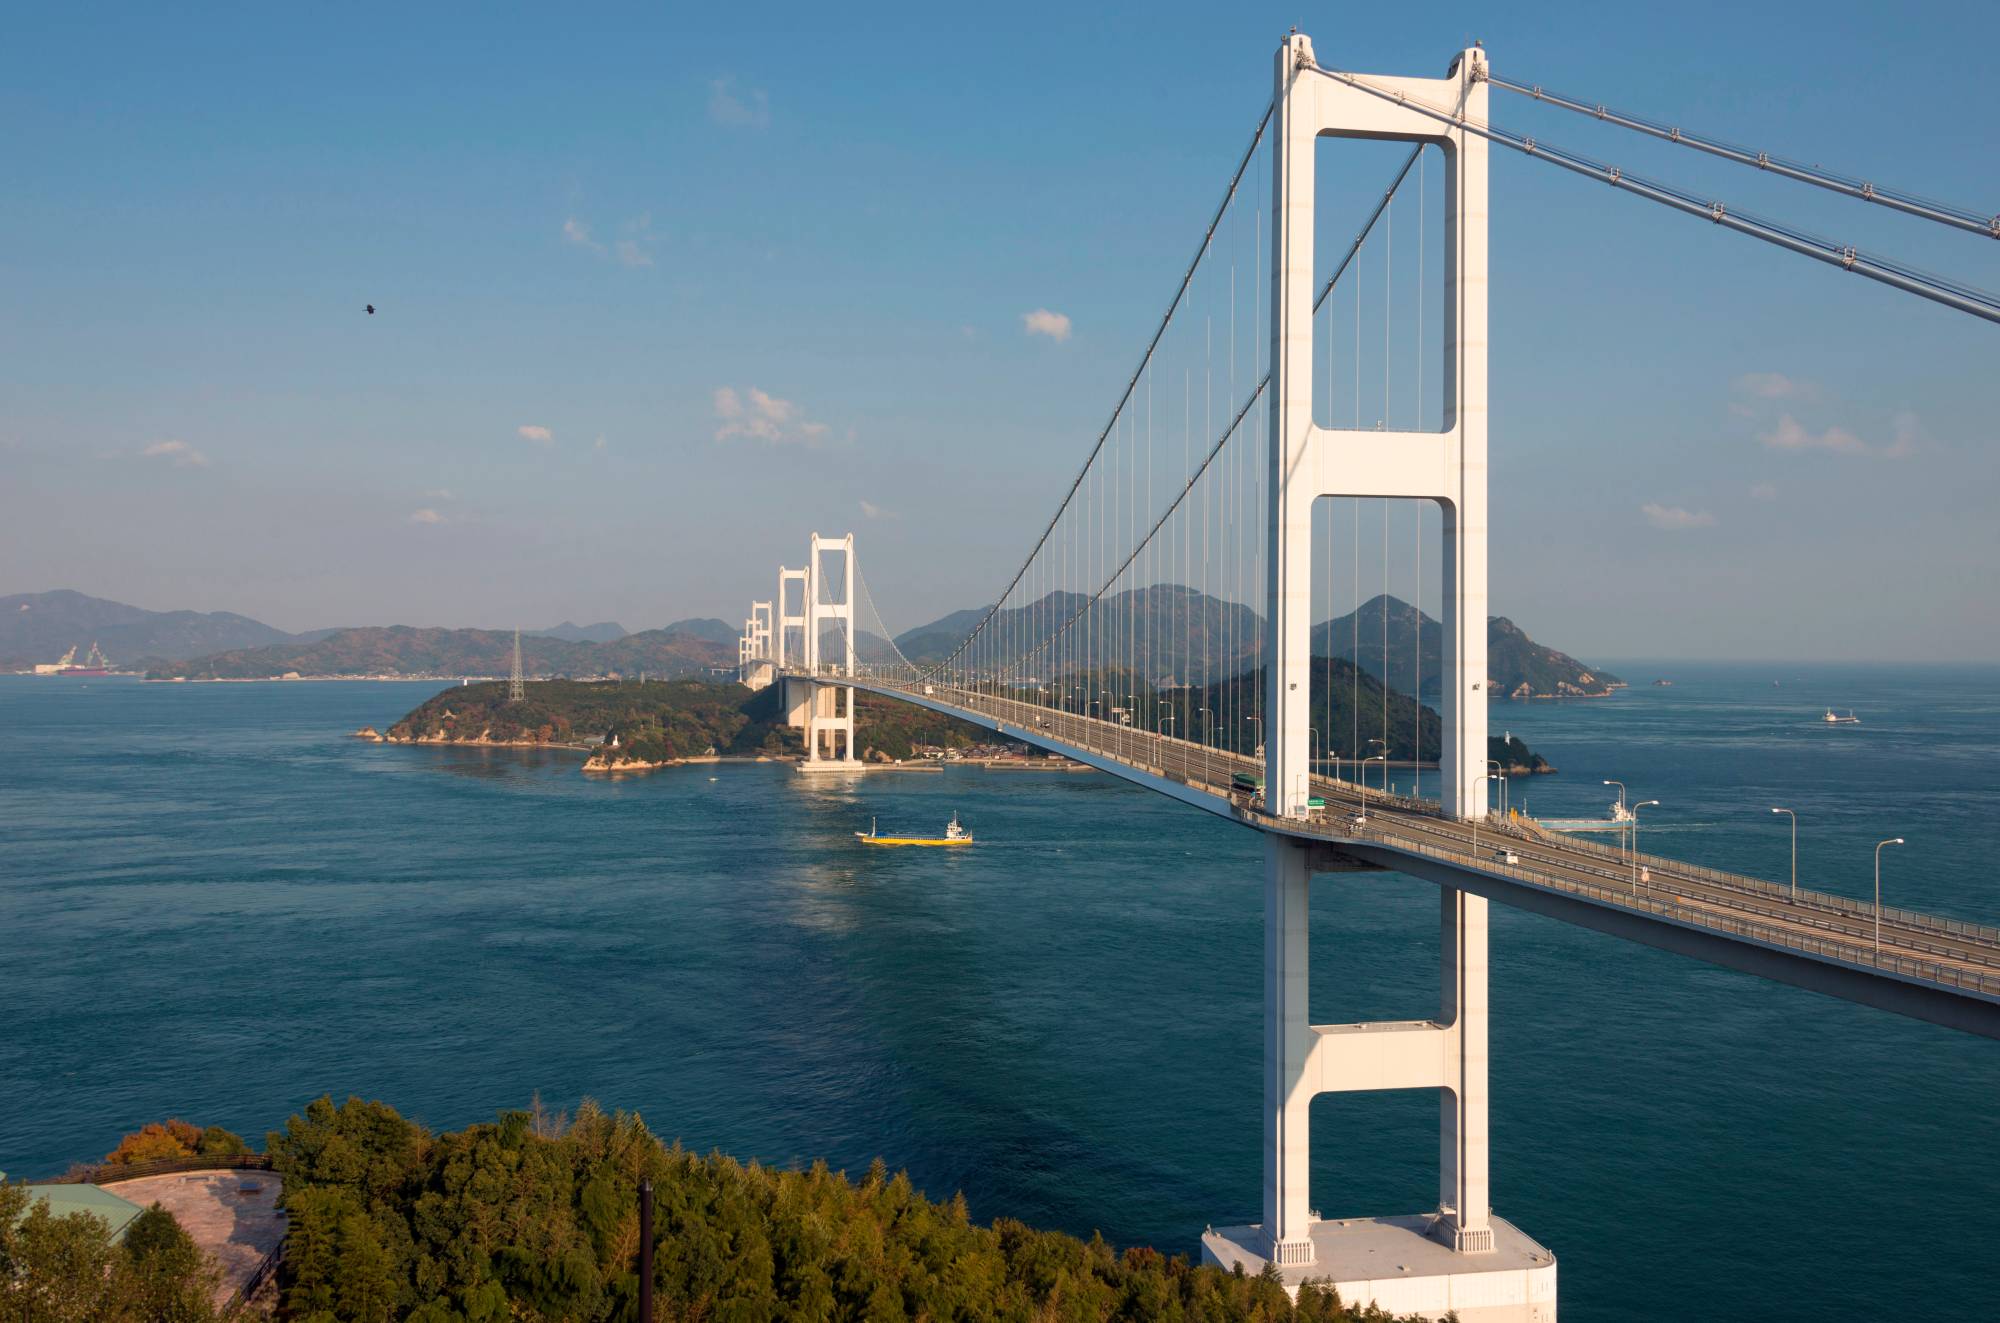 The Kurushima Kaikyo Ohashi — at 6.4 kilometers in length, the world’s longest suspension bridge structure and entranceway to the Setouchi Shimanami Kaido cycling route — near the city of Imabari, Ehime Prefecture, in November 2017 | ROB GILHOOLY